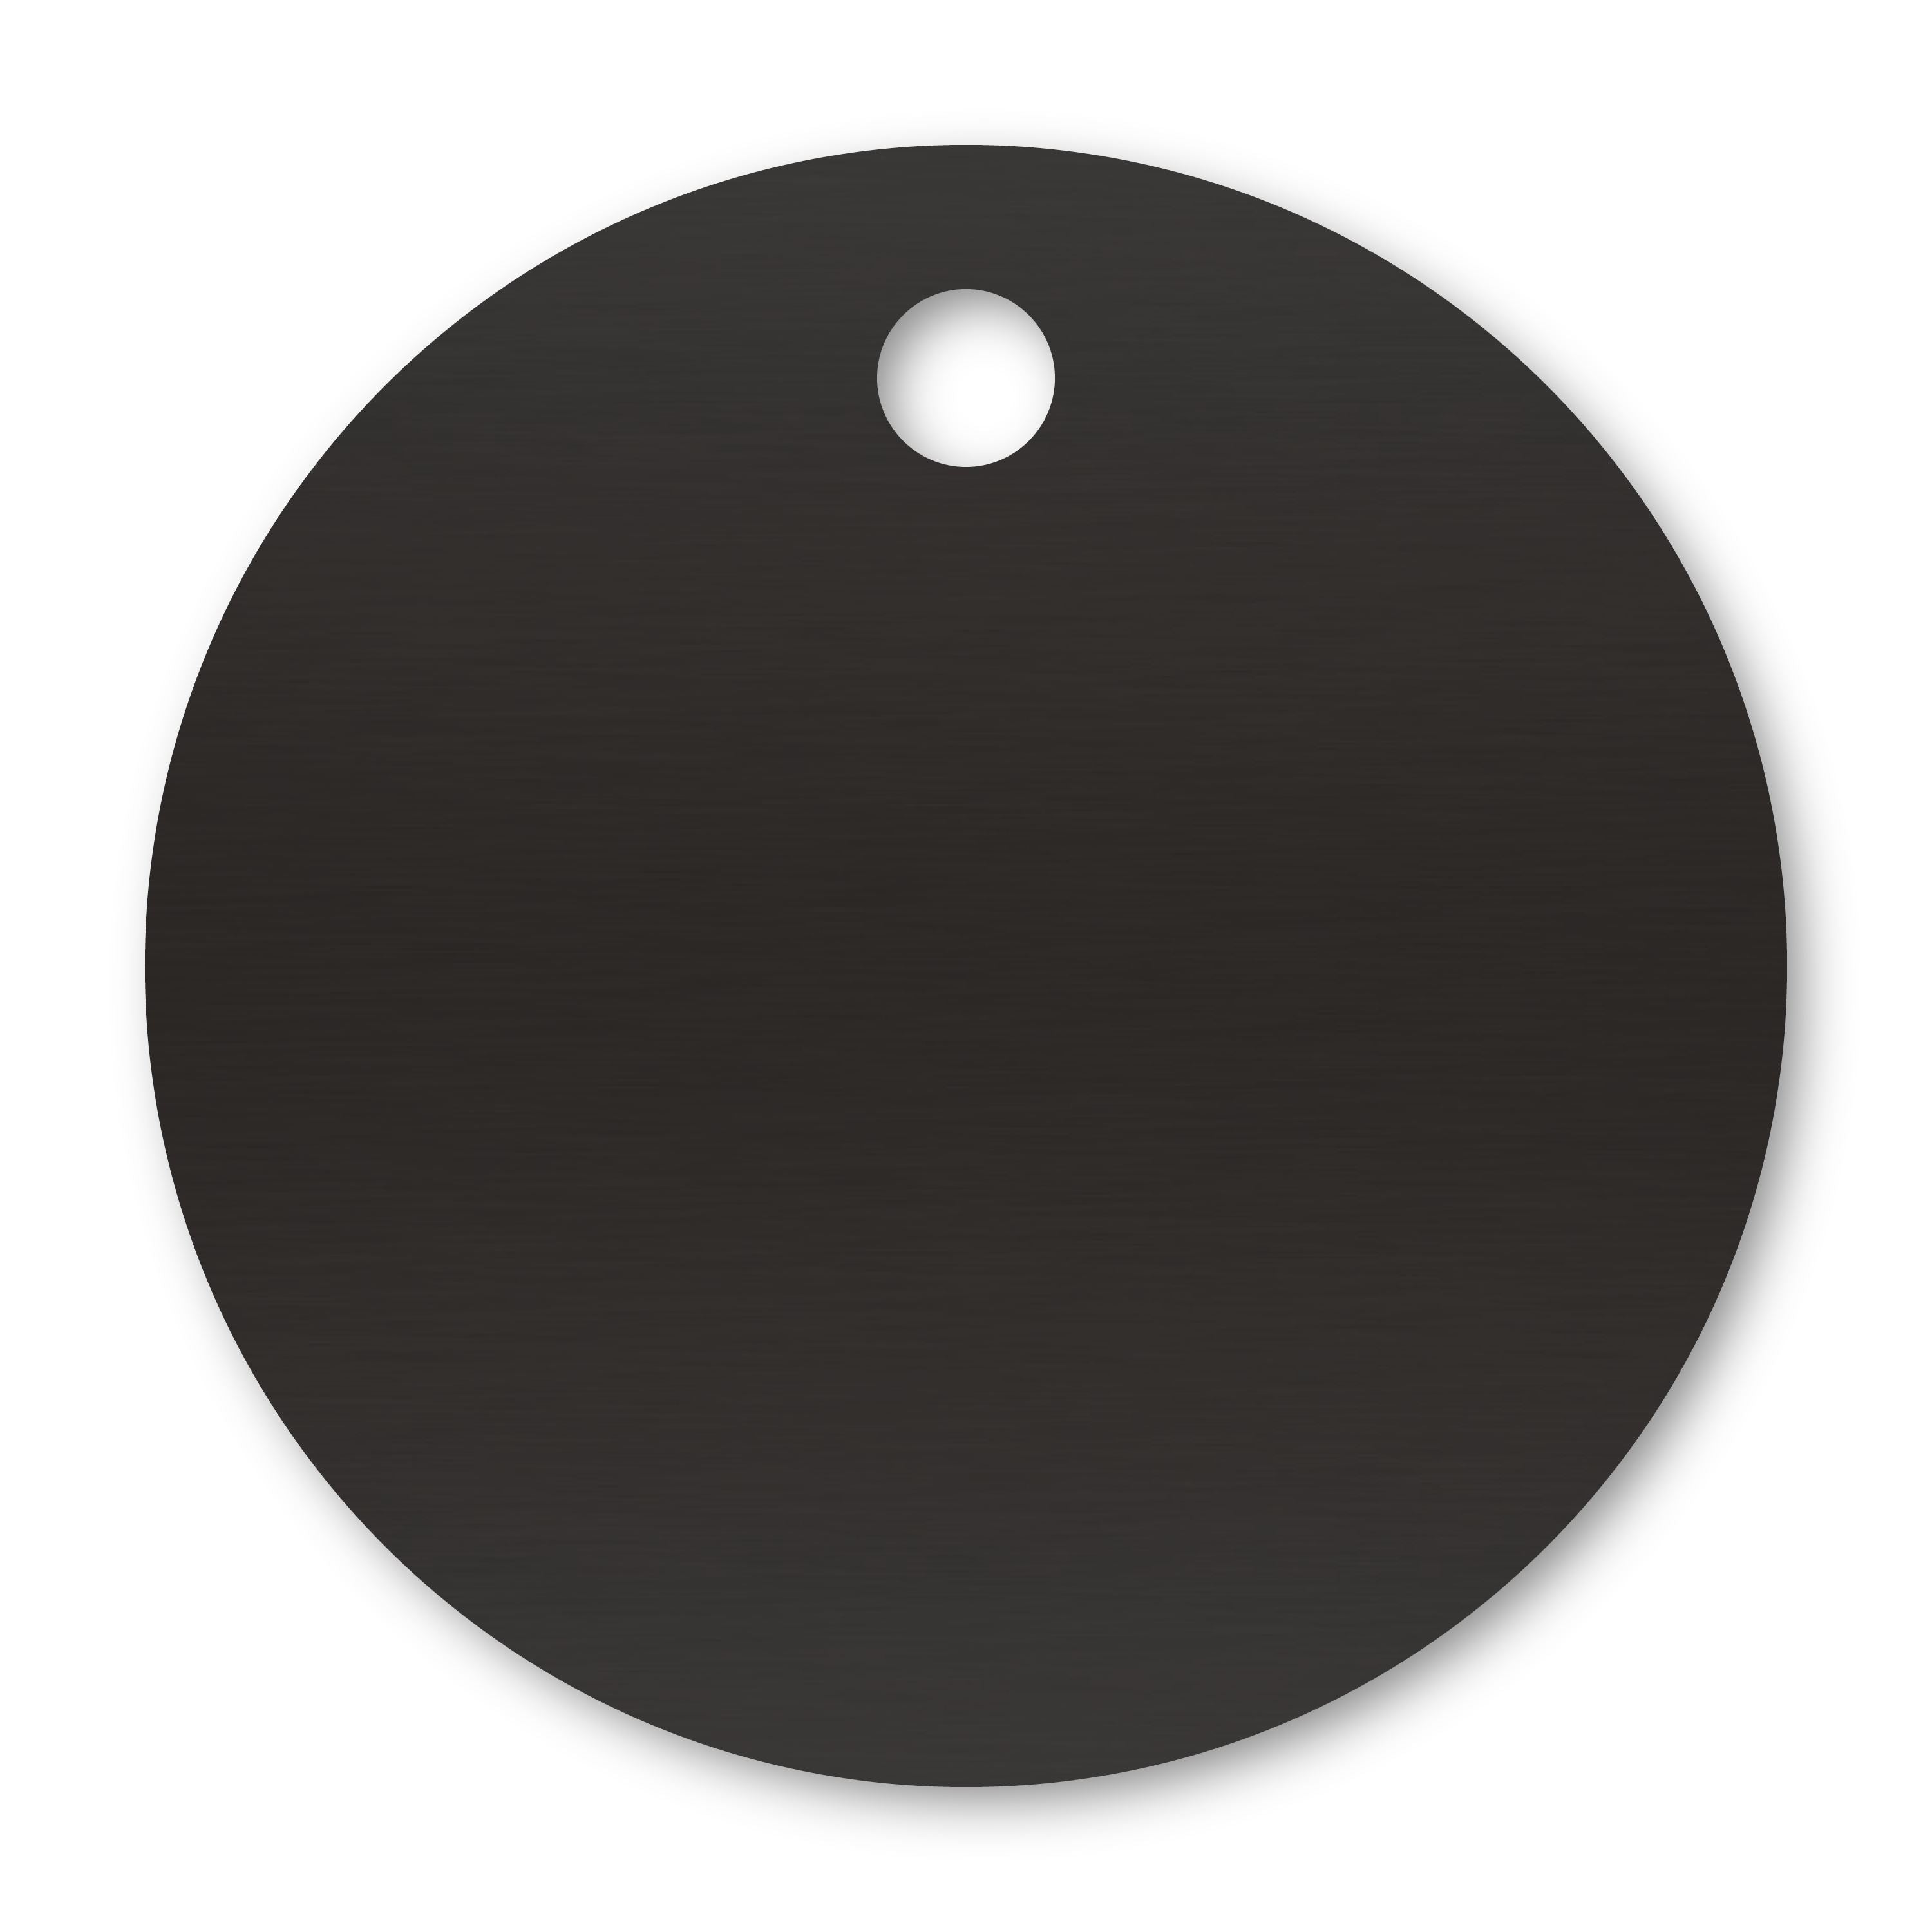 Anodized Aluminum Round Tags, 1-1/8" with 1/8" Hole, Laser Engraved Metal Tags Craftworks NW Black 